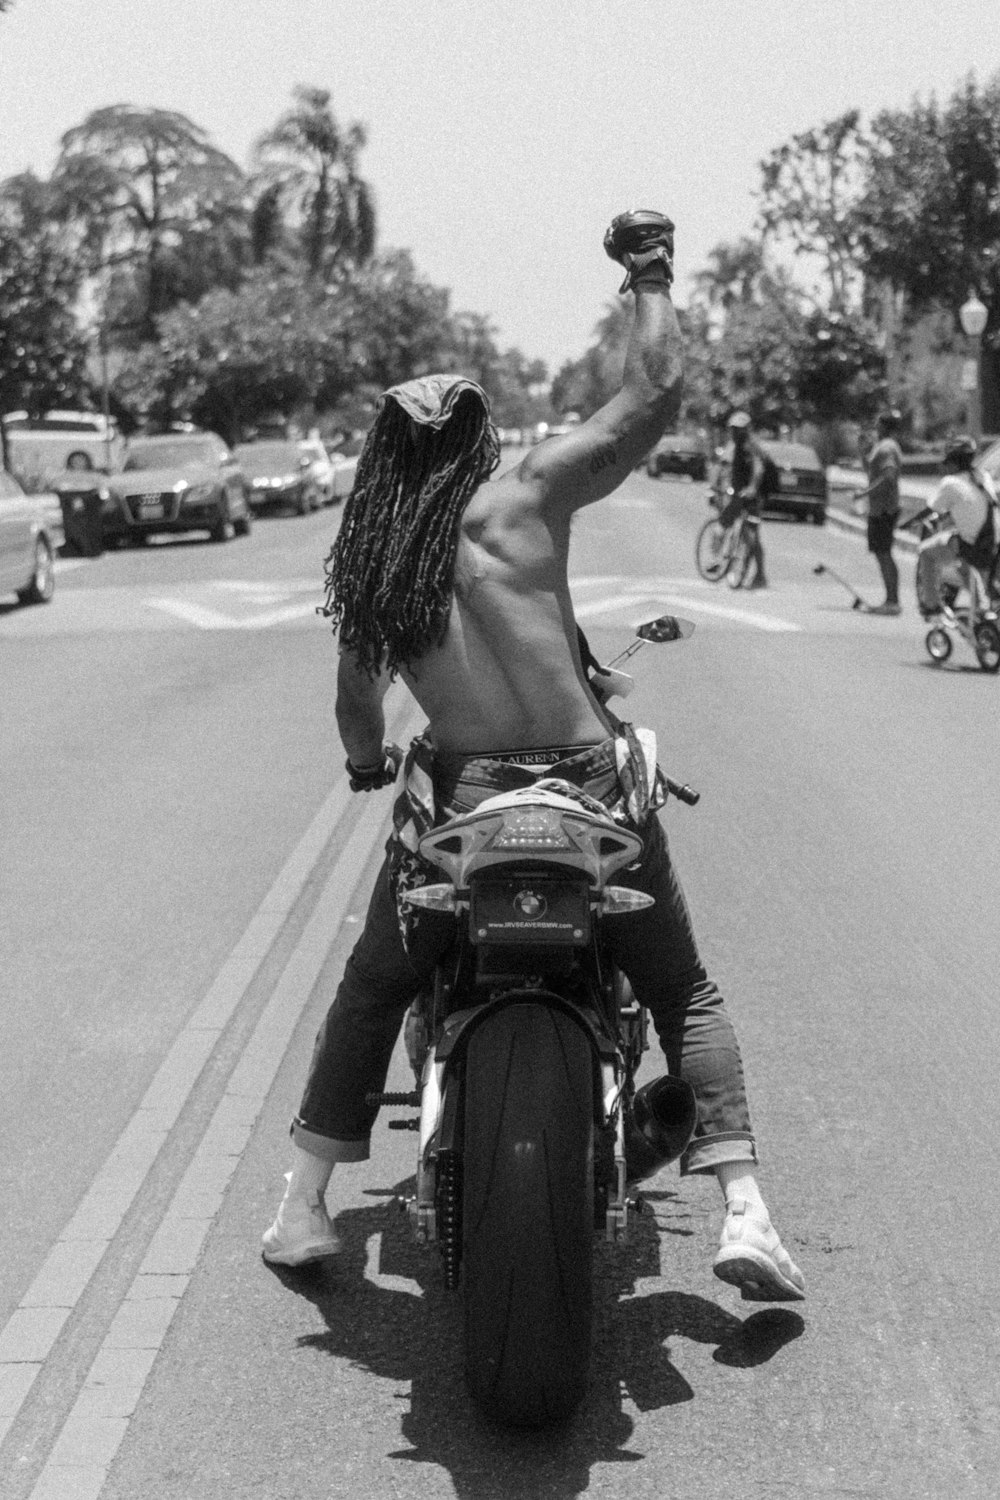 grayscale photo of woman riding motorcycle on road